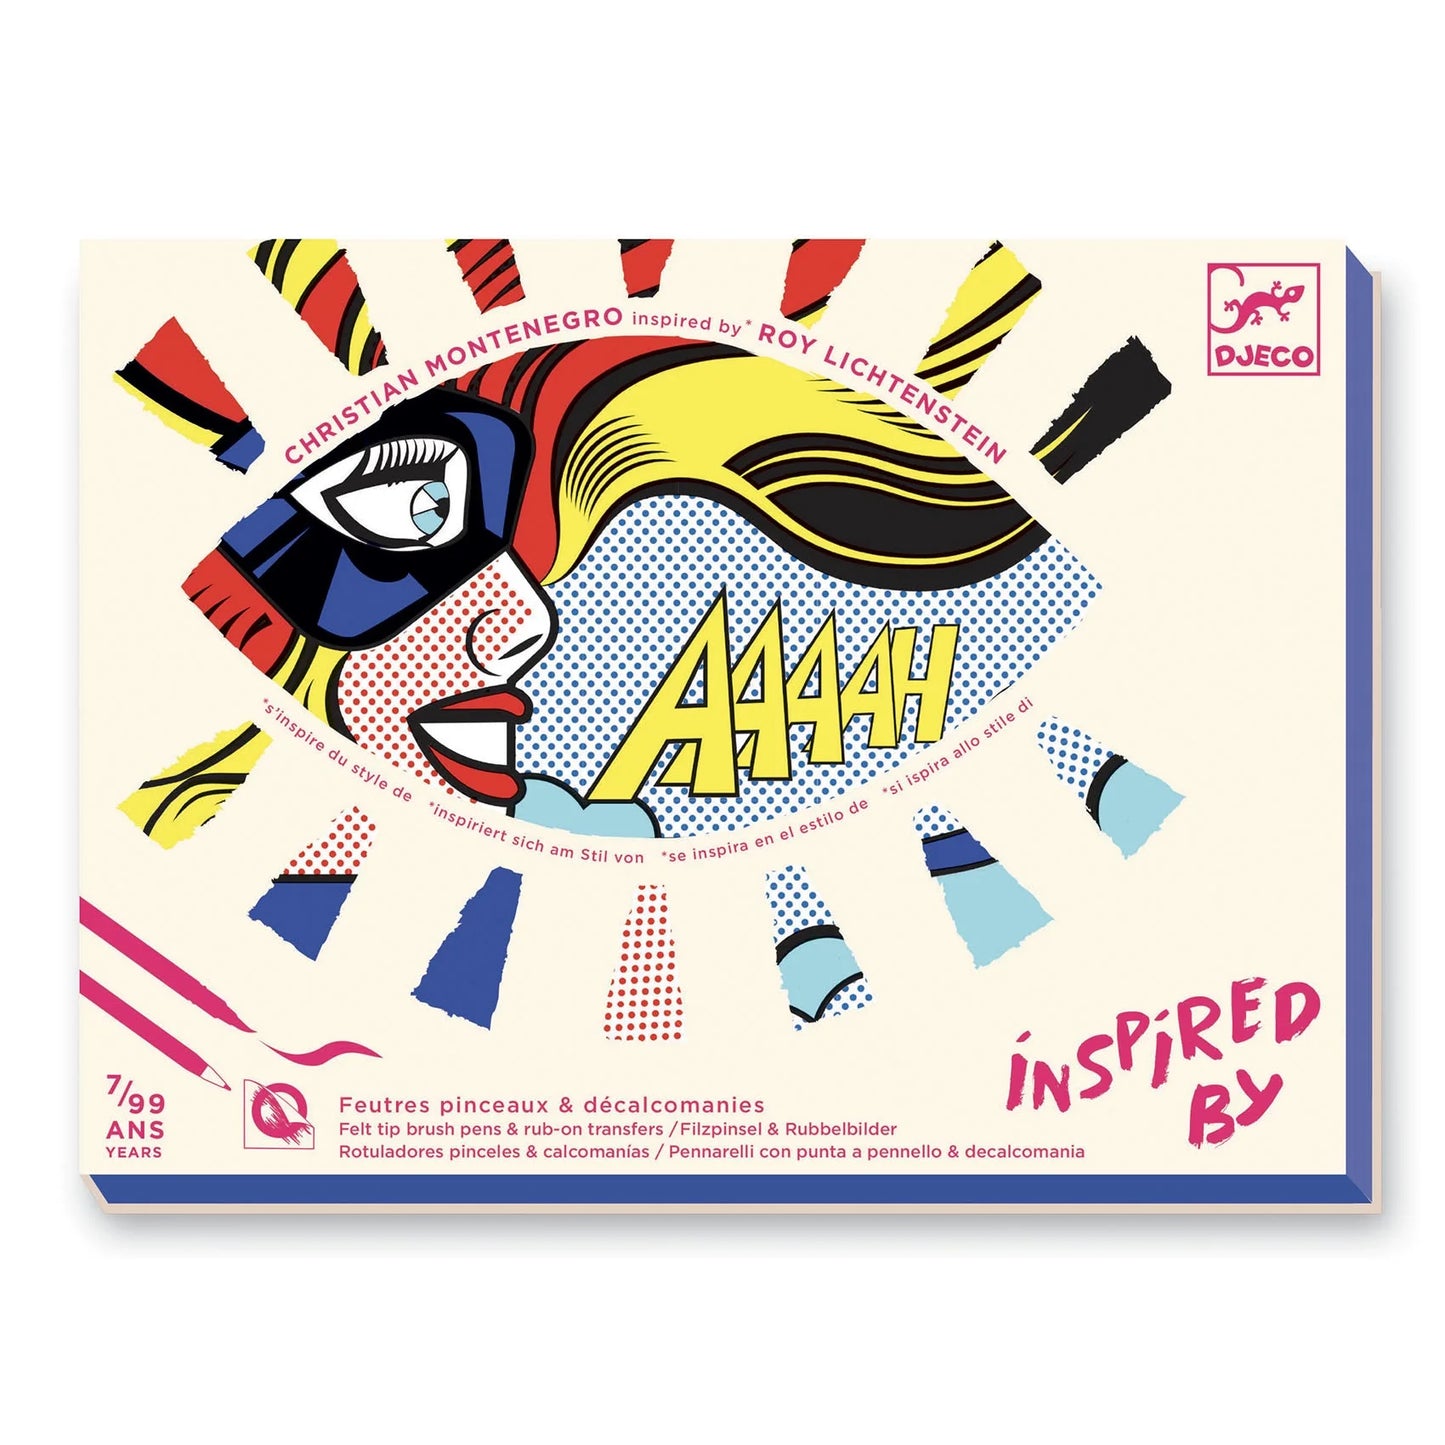 Inspired by Lichtenstein Superheroes Coloring and Rub-On Transfer Kit